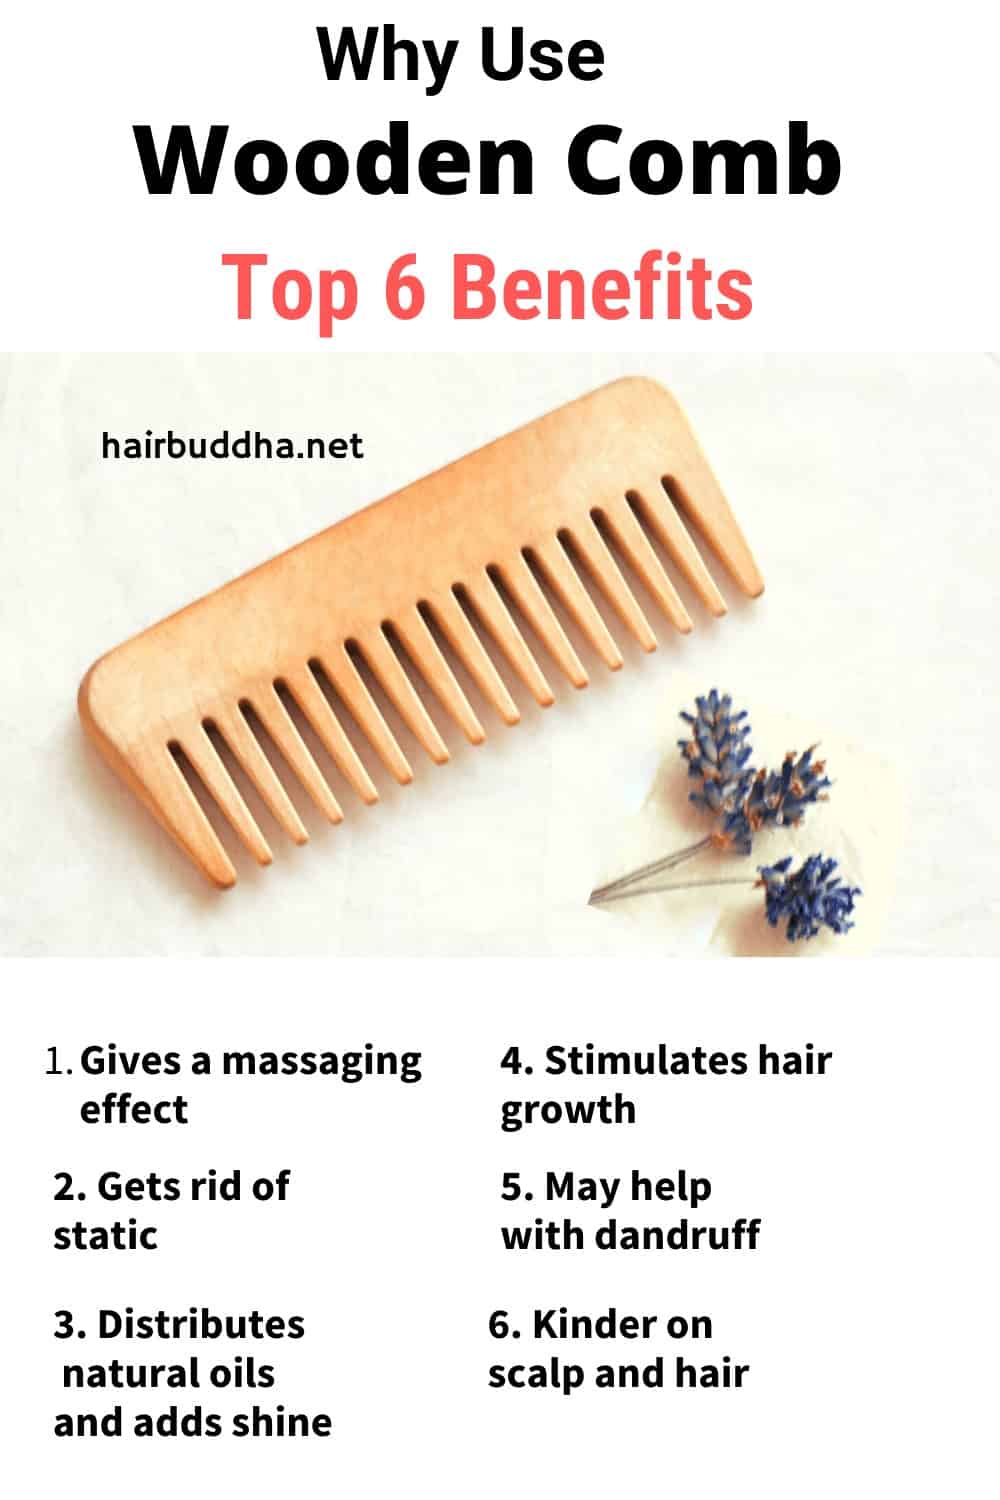 Why use wooden comb